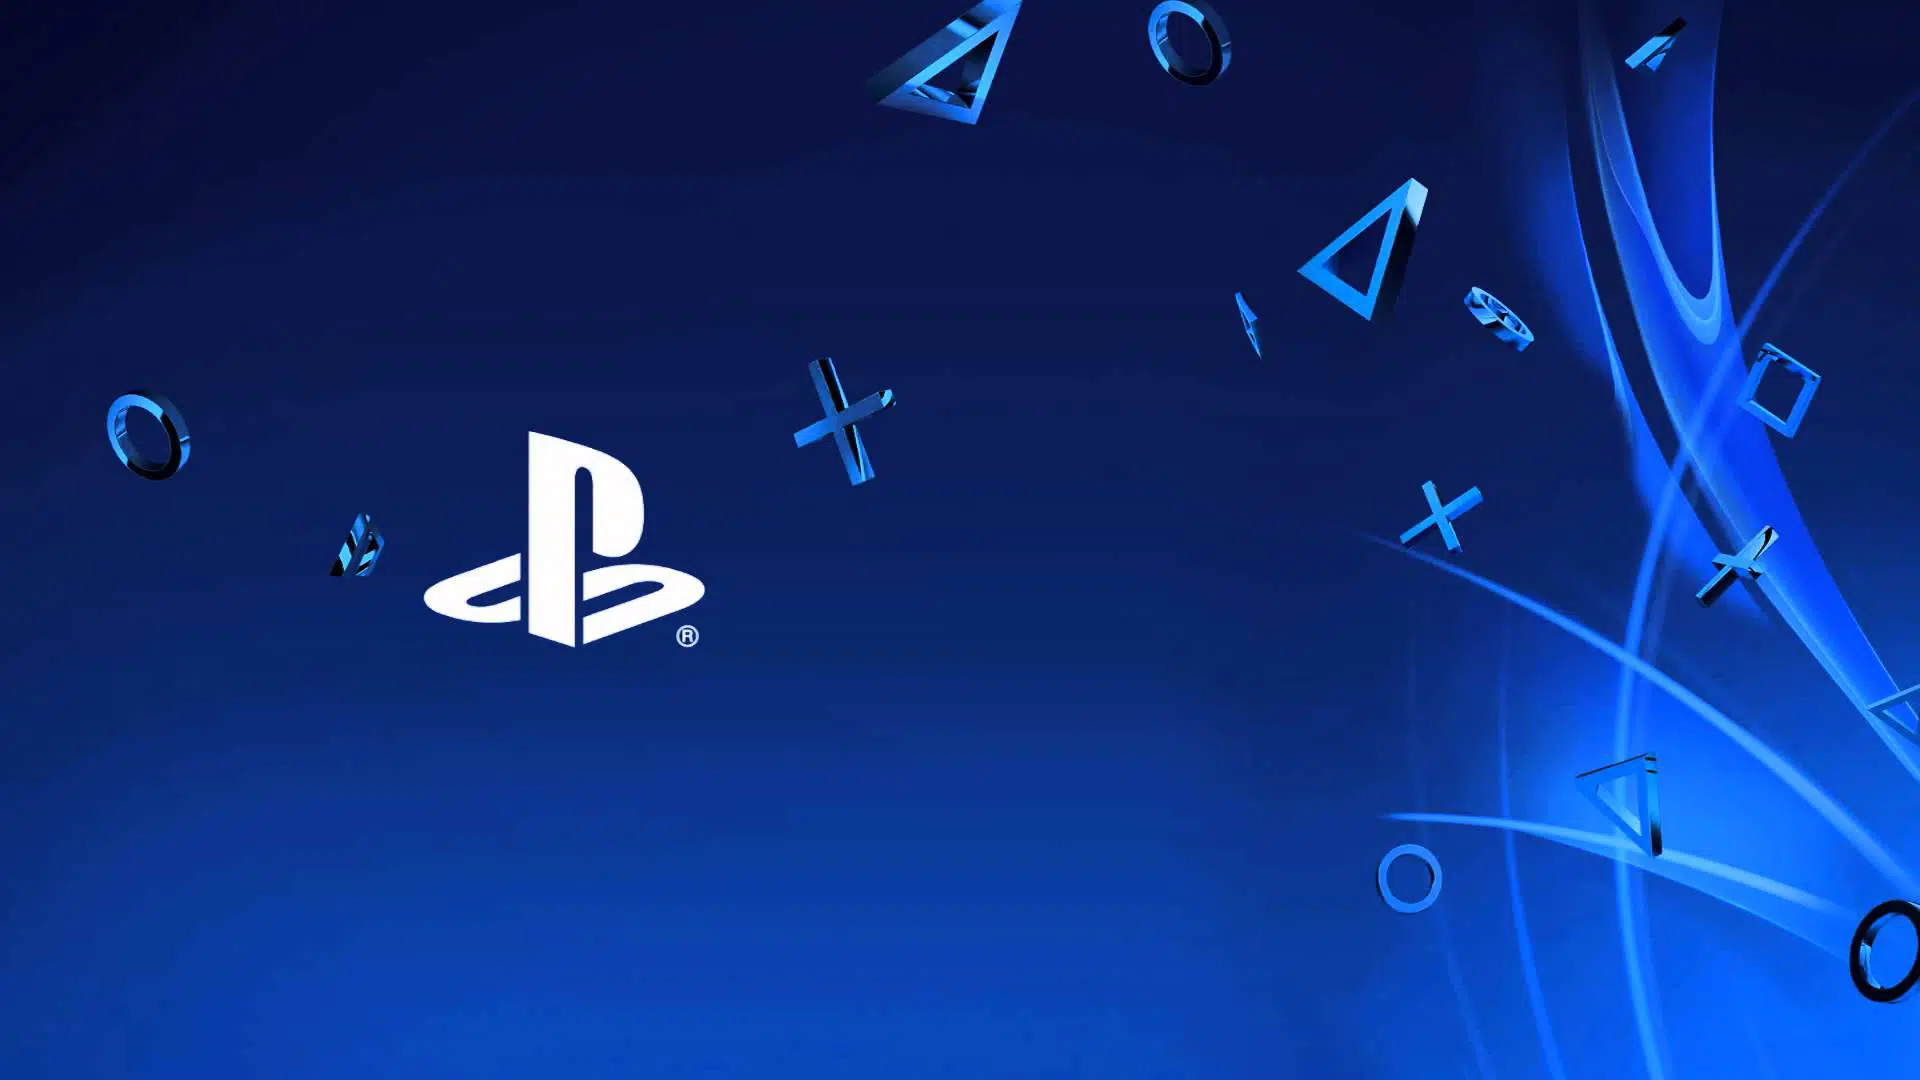 PlayStation most downloaded games of 2021